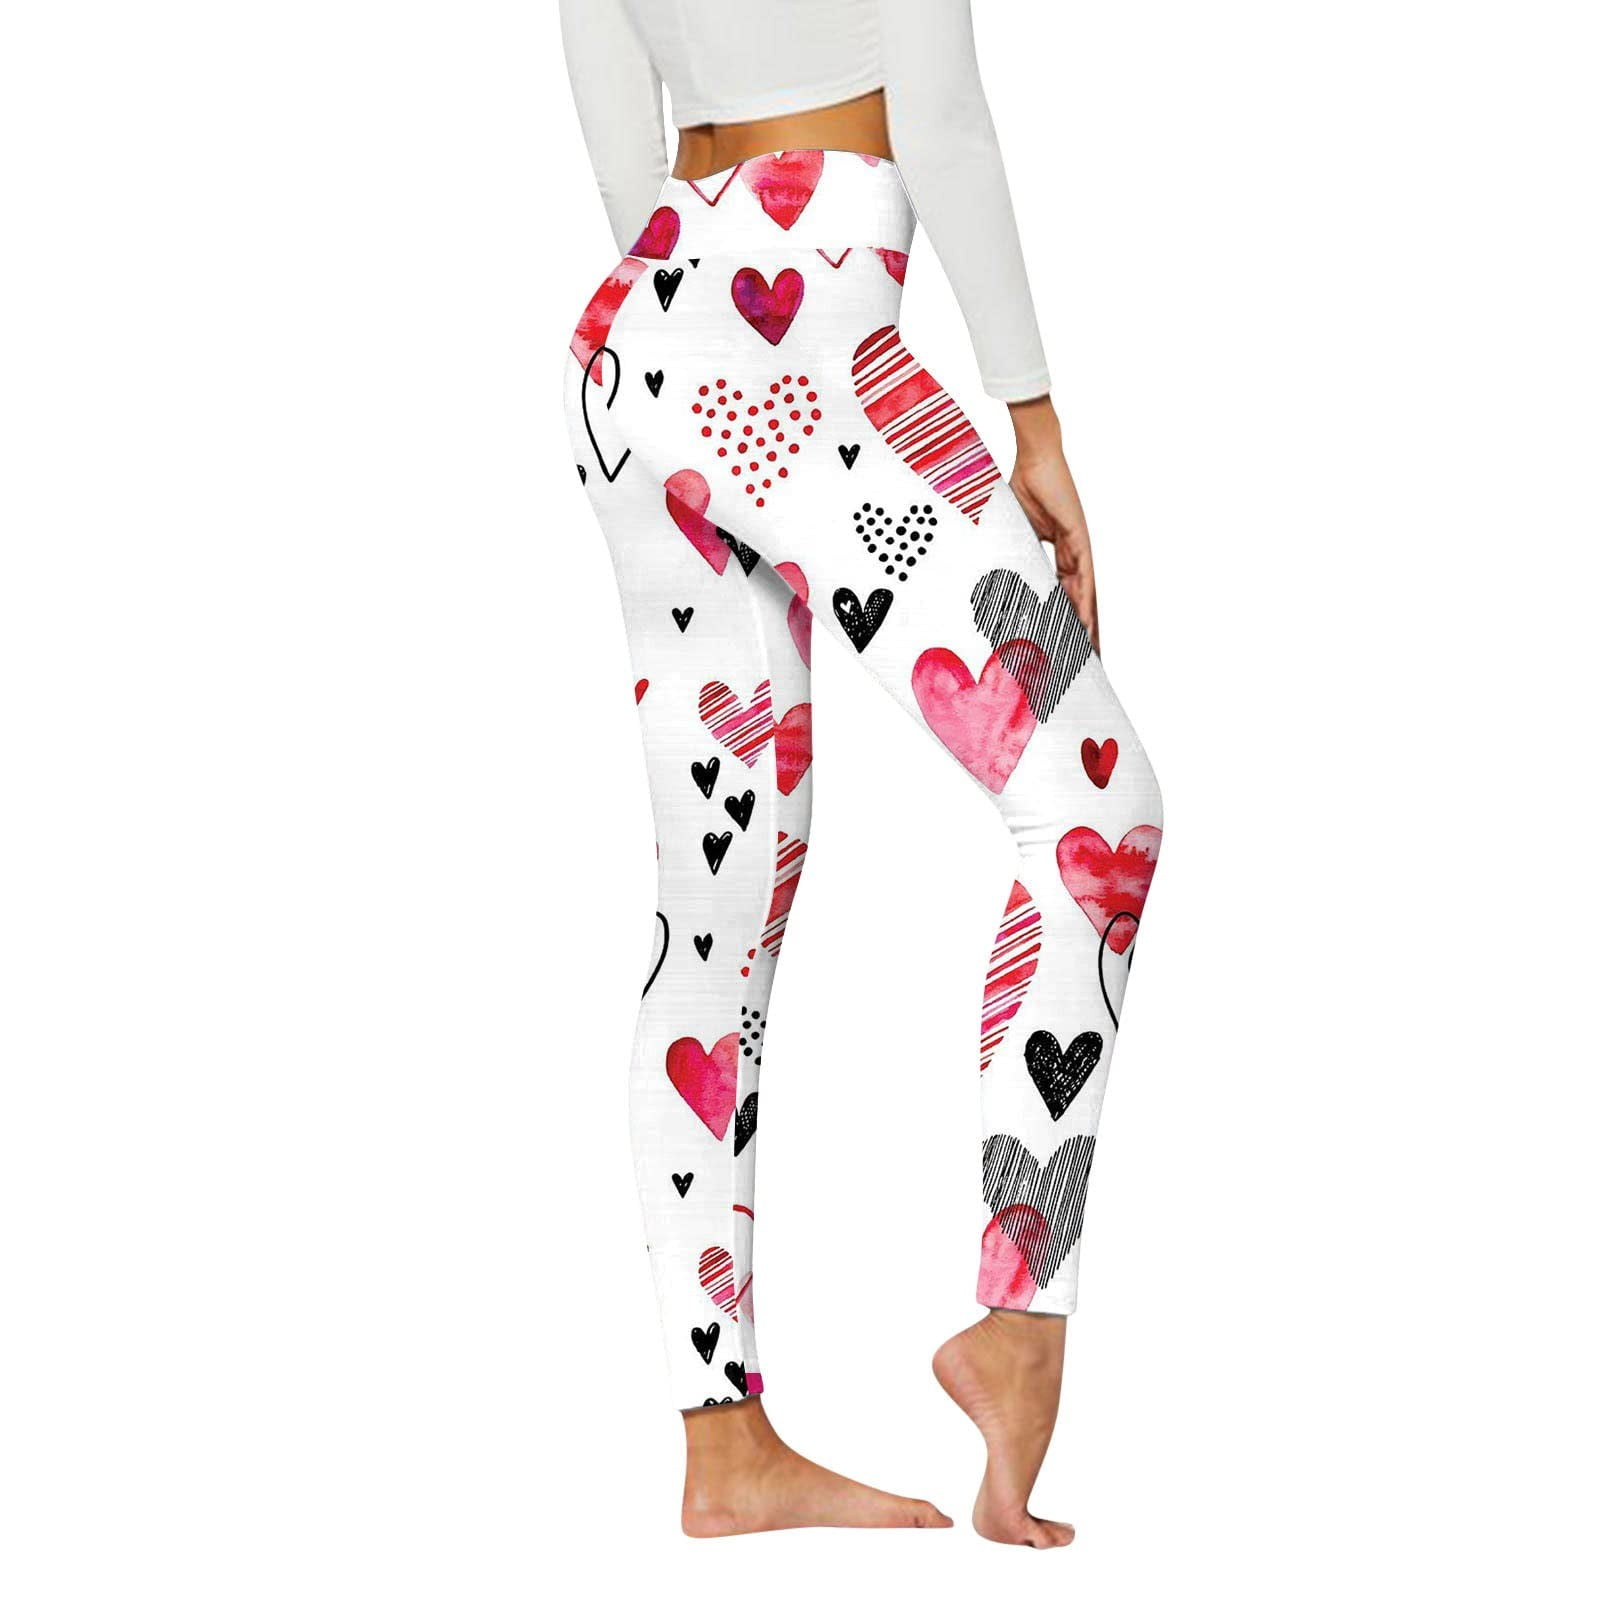 Chiccall High Waisted Pattern Leggings for Women - Buttery Soft